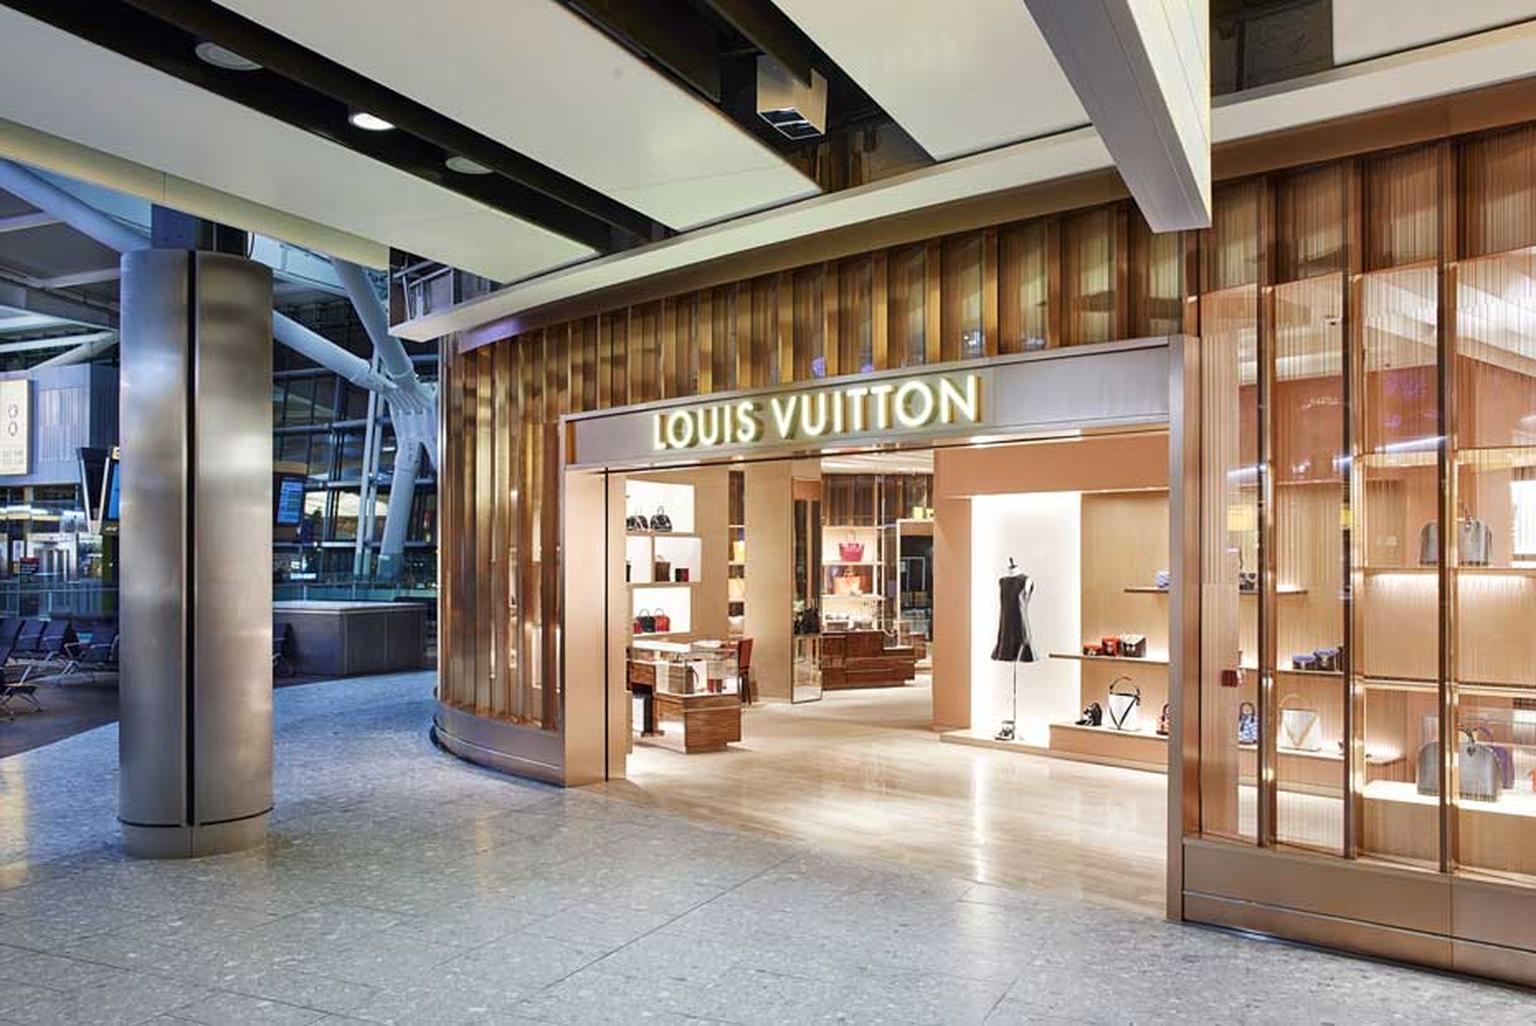 Louis Vuitton has opened its first airport store in Europe at Heathrow’s Terminal 5.